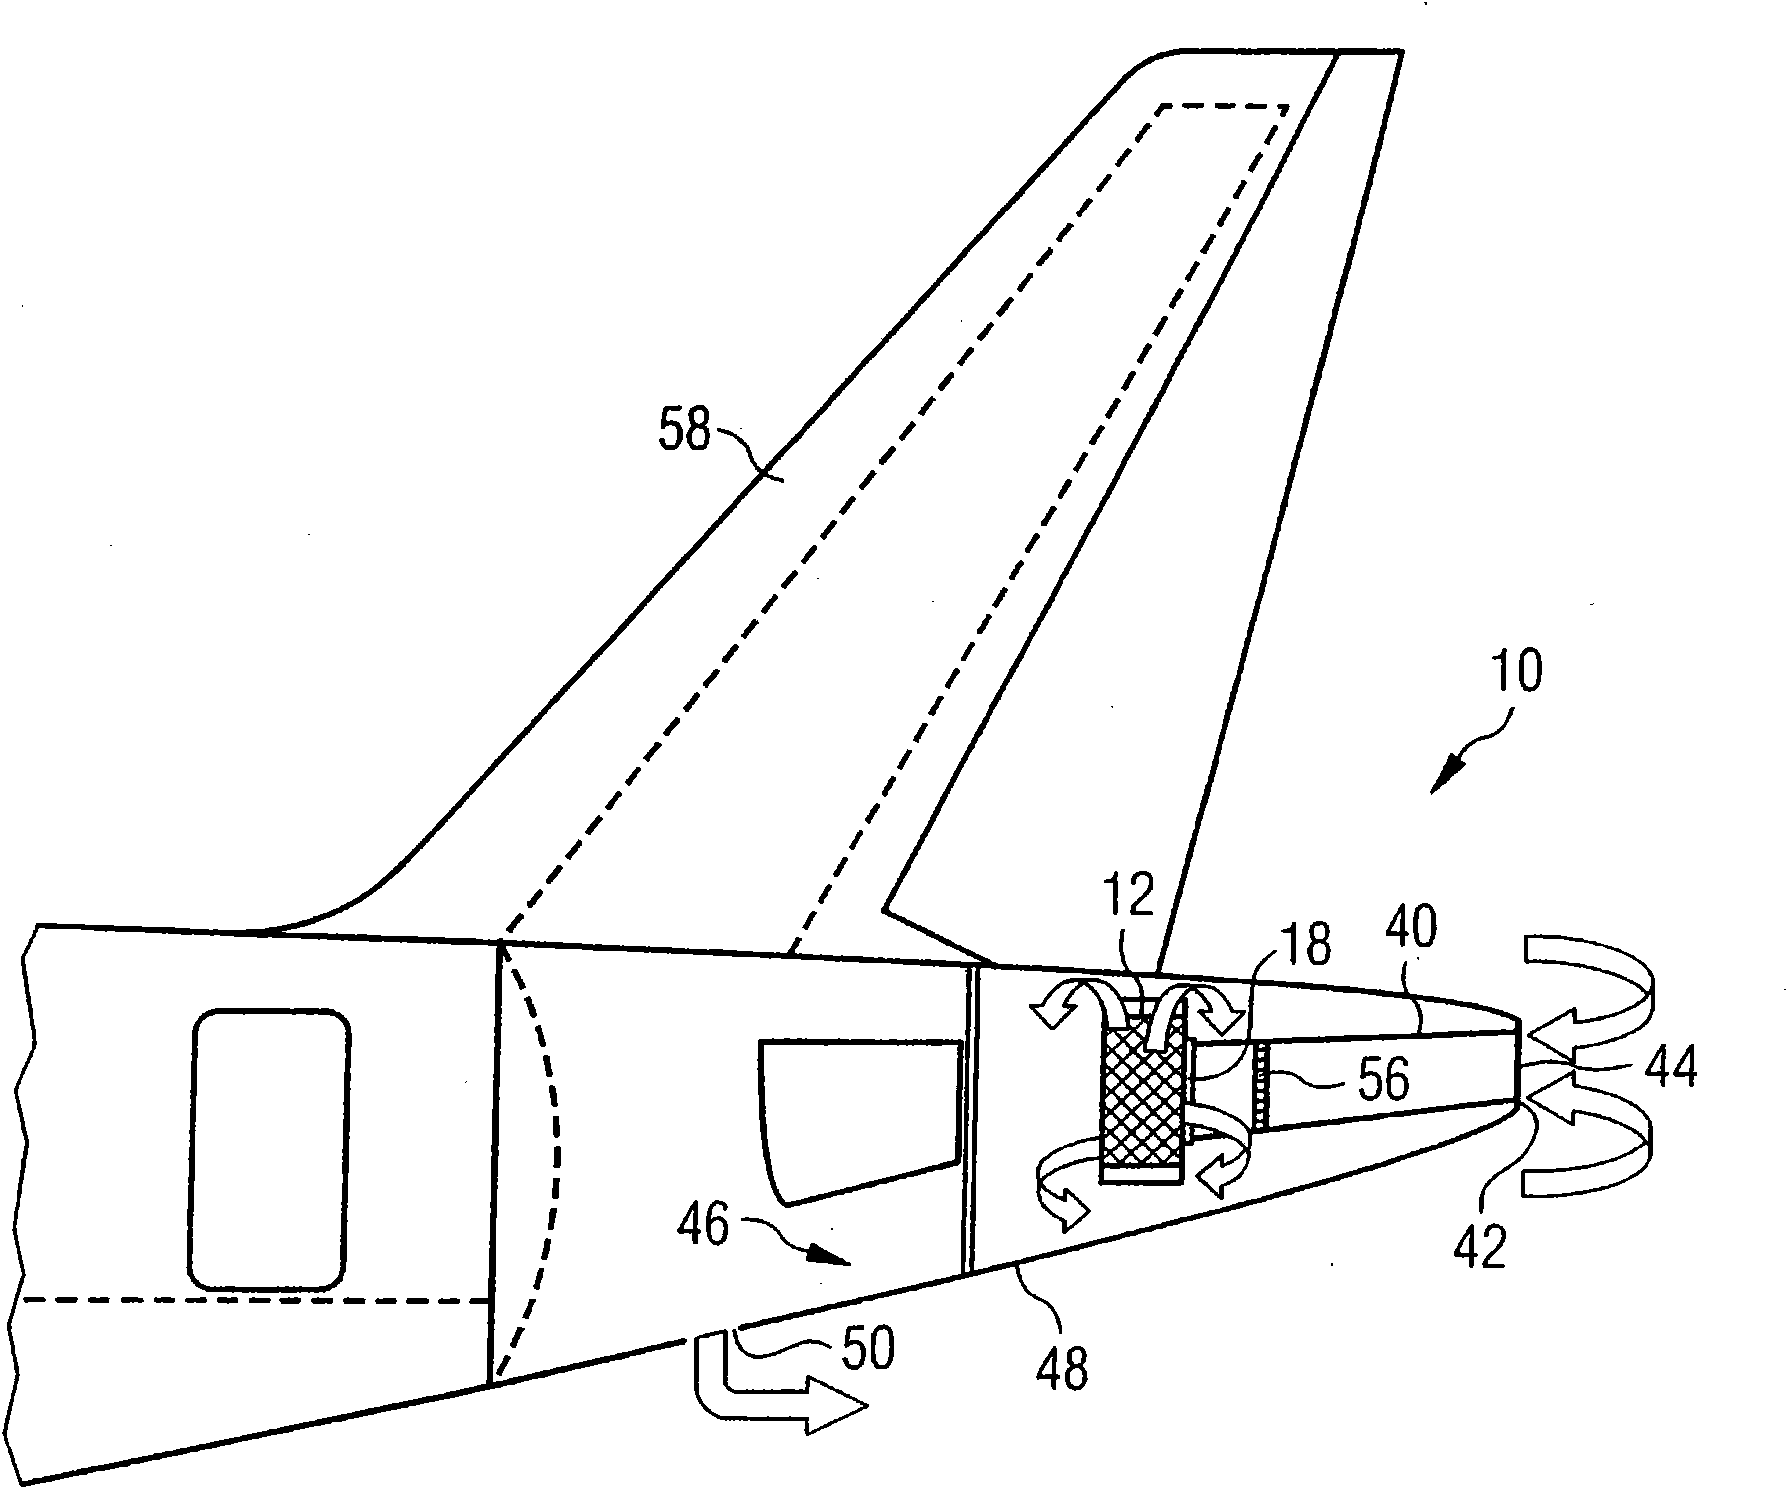 Aircraft cooling system